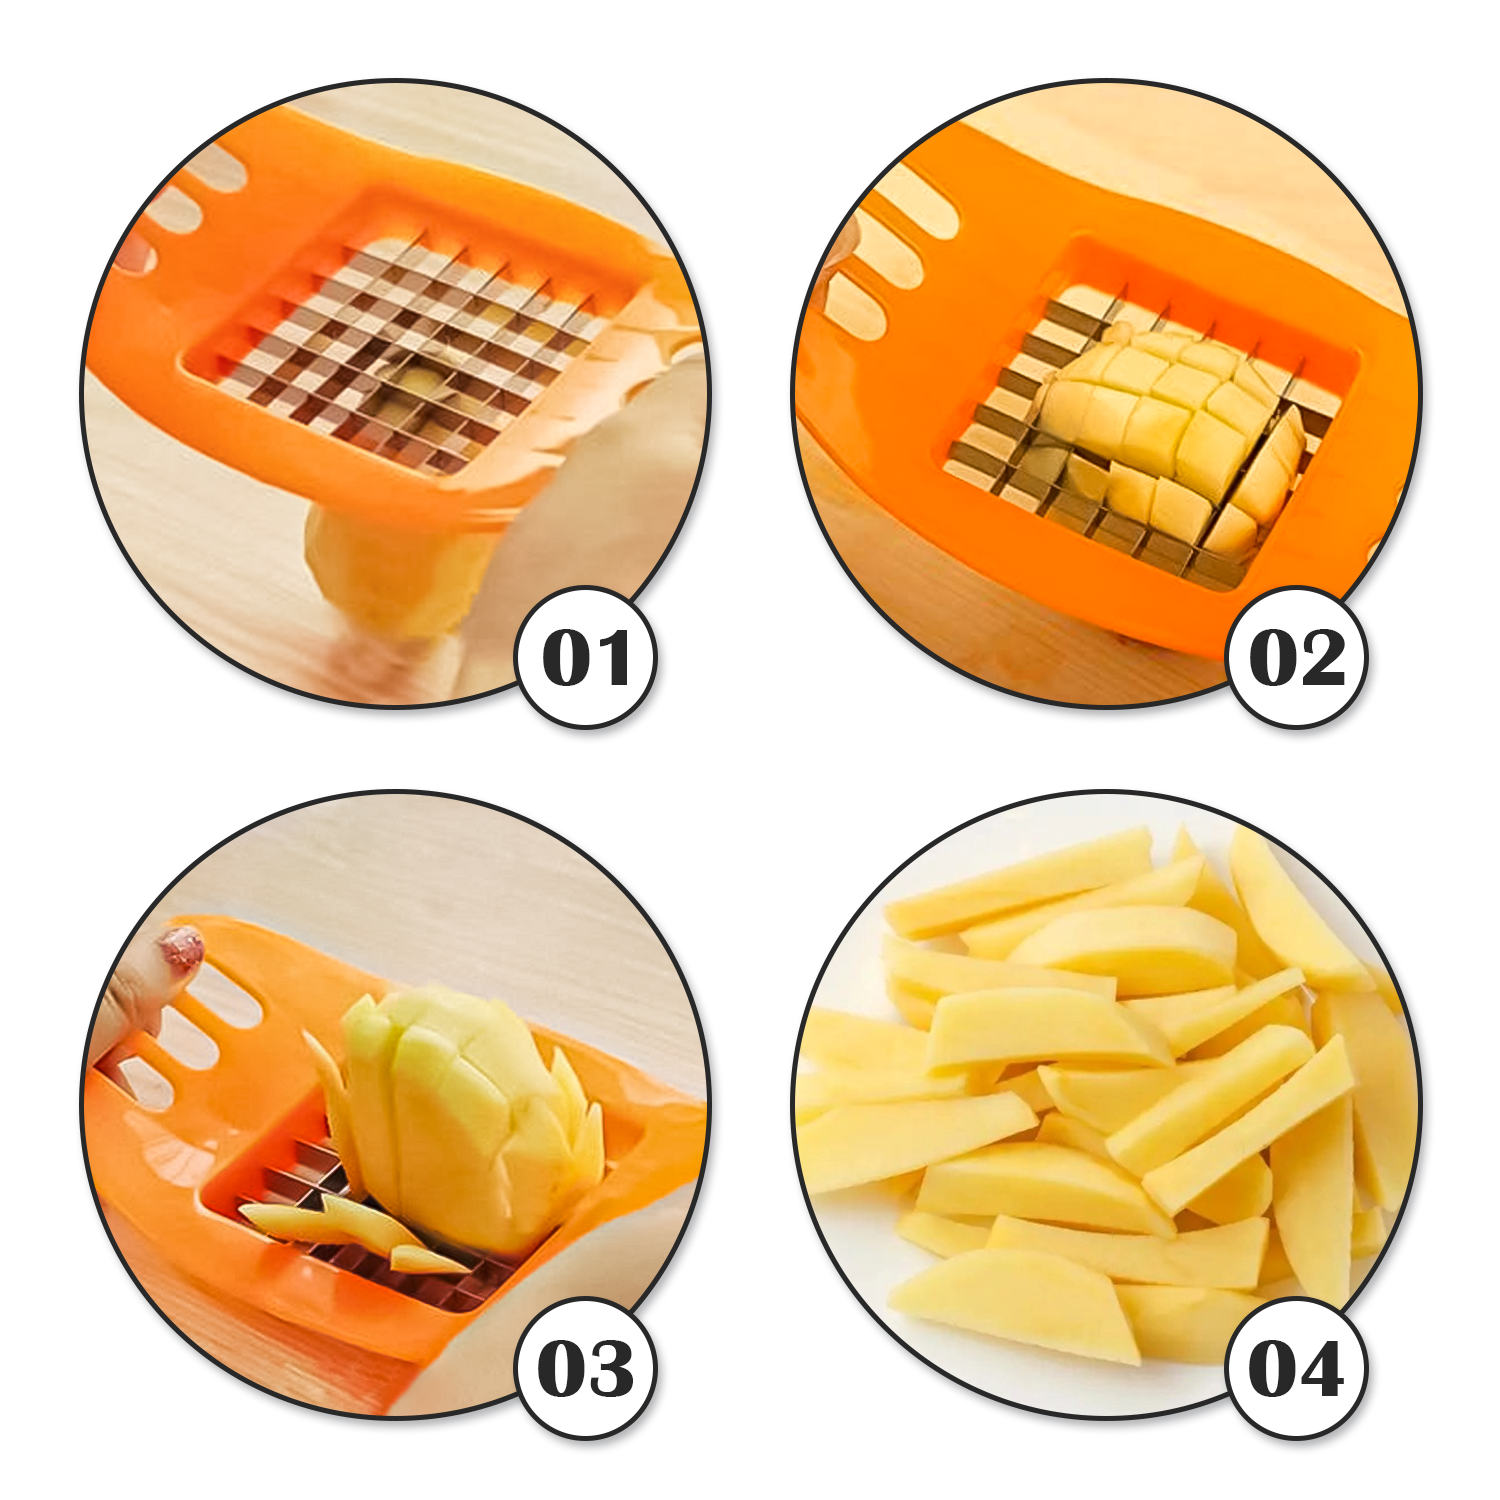 French Fry Cutter Potato Chipper Vegetable Slicer with 2 Interchangeable  Stainless Steel Grid Blades for Homemade Chips Fries Potatoes Carrots  Cucumbers Veggie Sticks, Red 